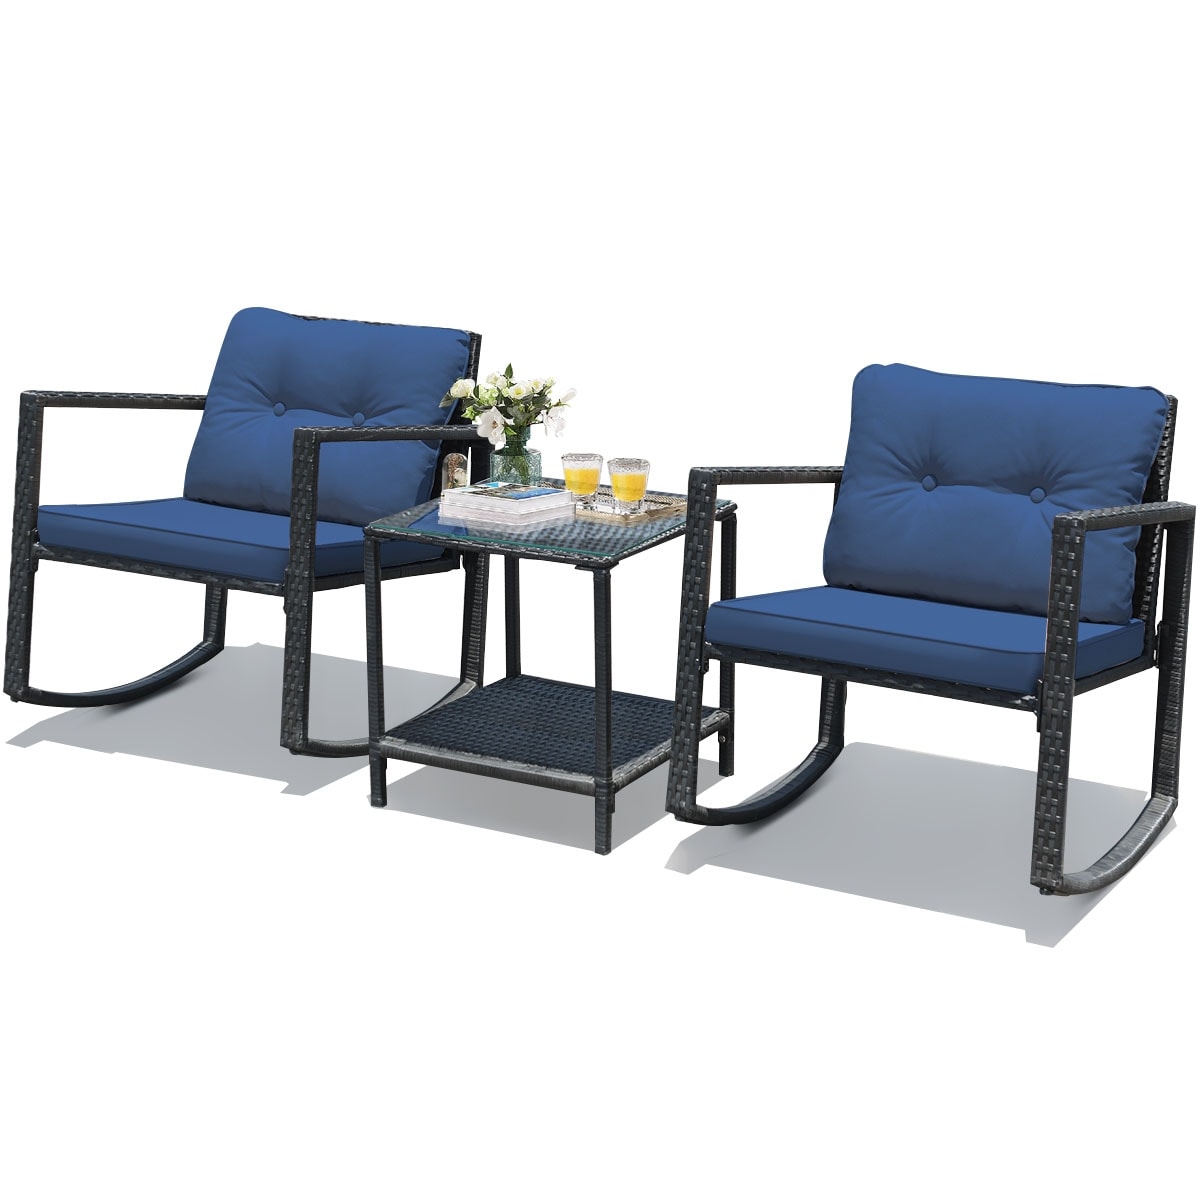 Blue Cushion 3 Piece Steel Rocking Patio Furniture Set Modern Outdoor Wicker Conversation Chair Sets with Soft Cushion and Coffee Table